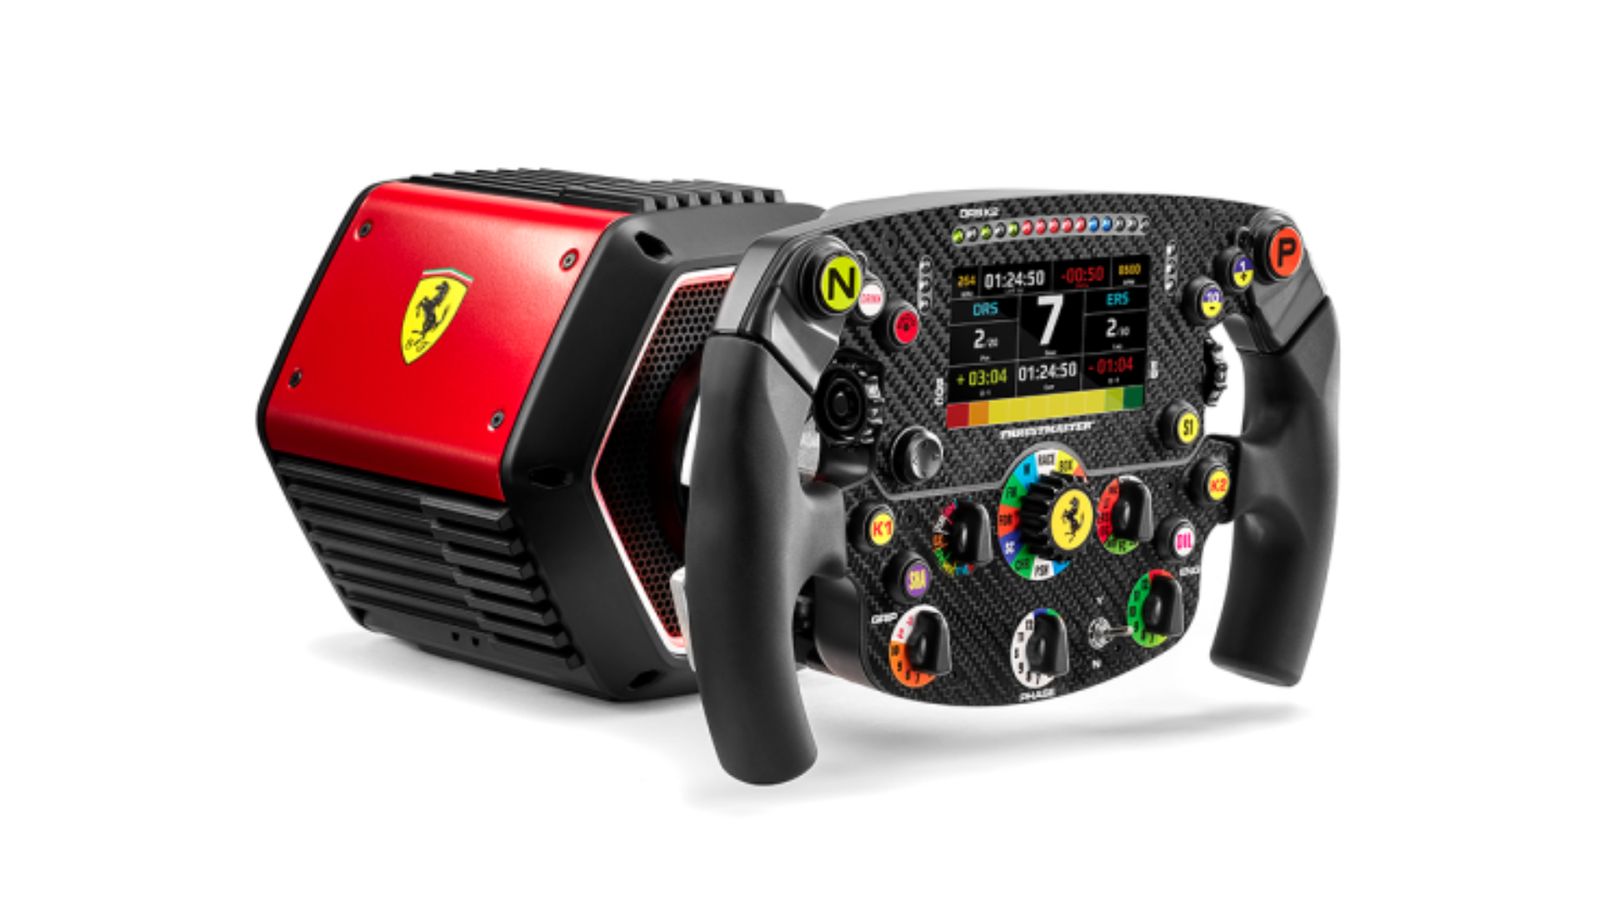 Thrustmaster T818 Ferrari SF1000 product image of a black and red Ferrari-branded F1-style racing wheel.